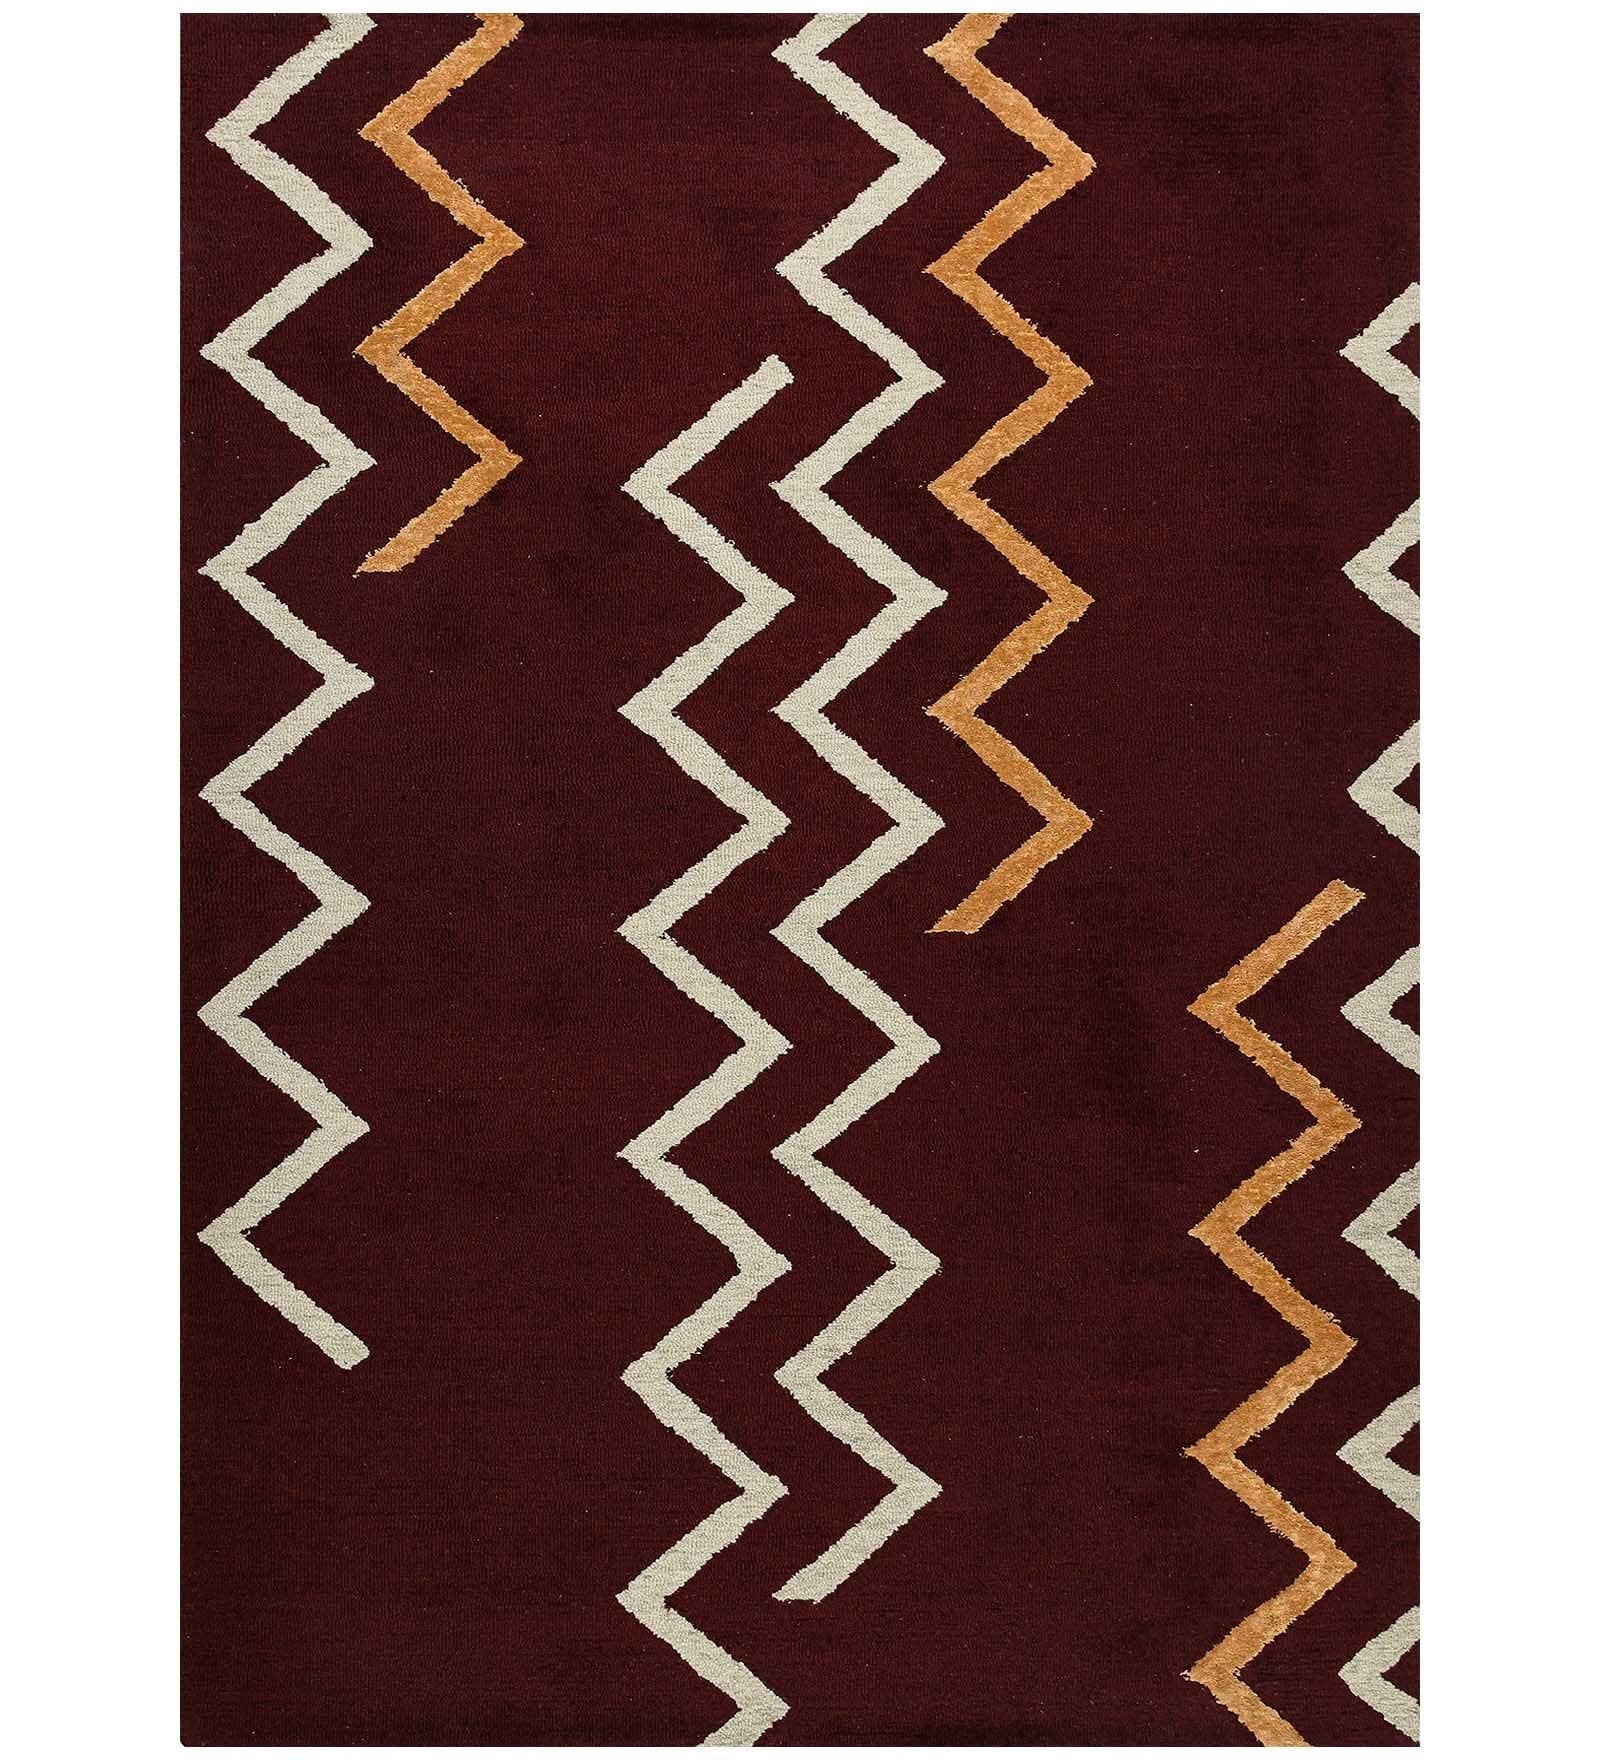 RED BERRY Wool & Viscose Canyan 5x8 Feet  Hand-Tufted Carpet - Rug